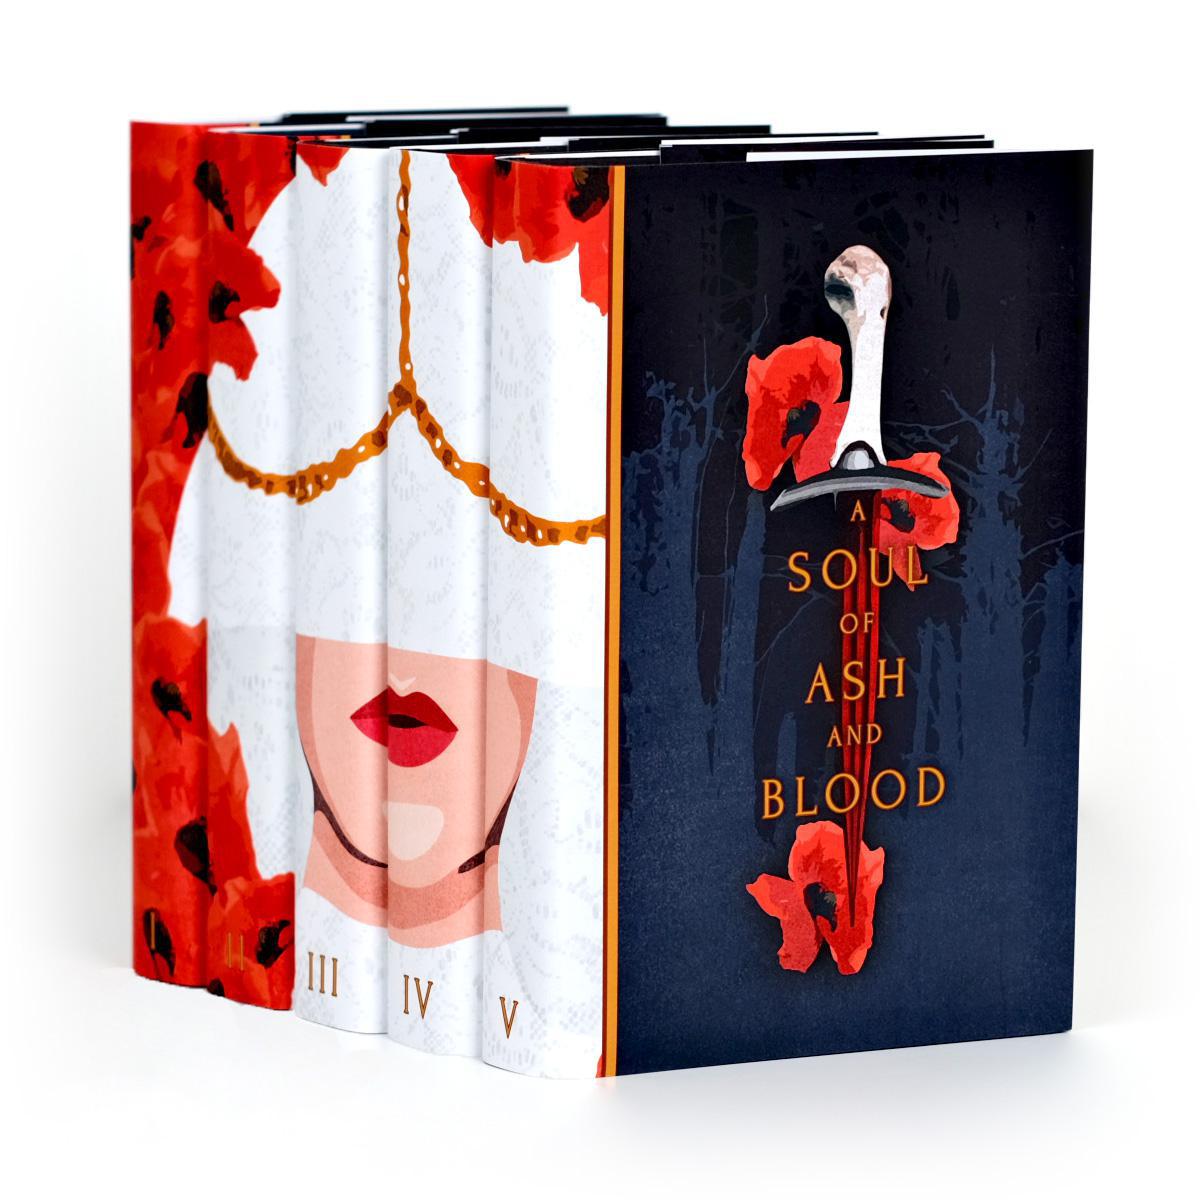 Blood and Ash: A Soul of Ash and Blood - Single Book - MTO